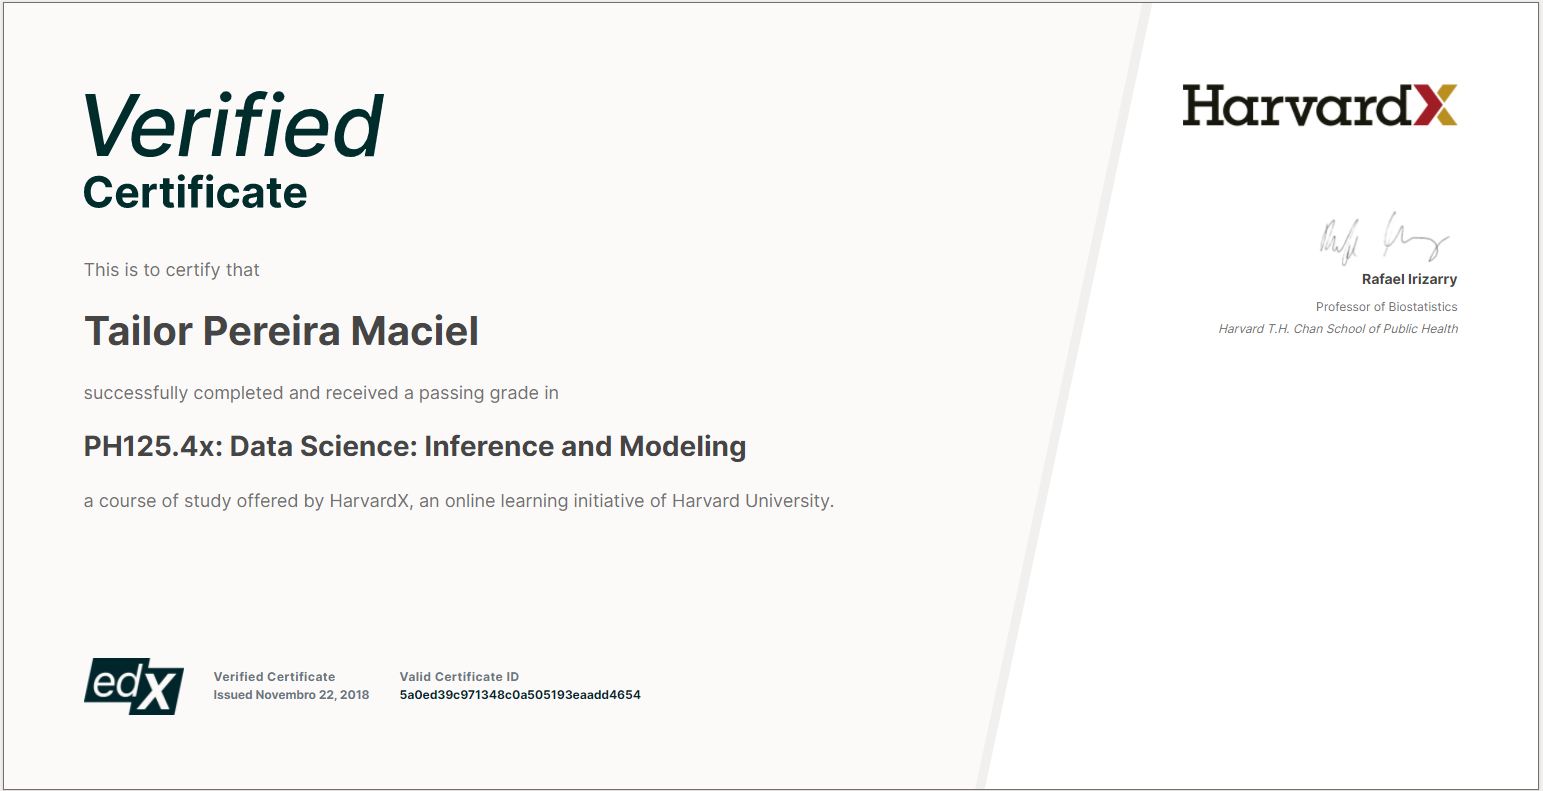 Inference and Modeling